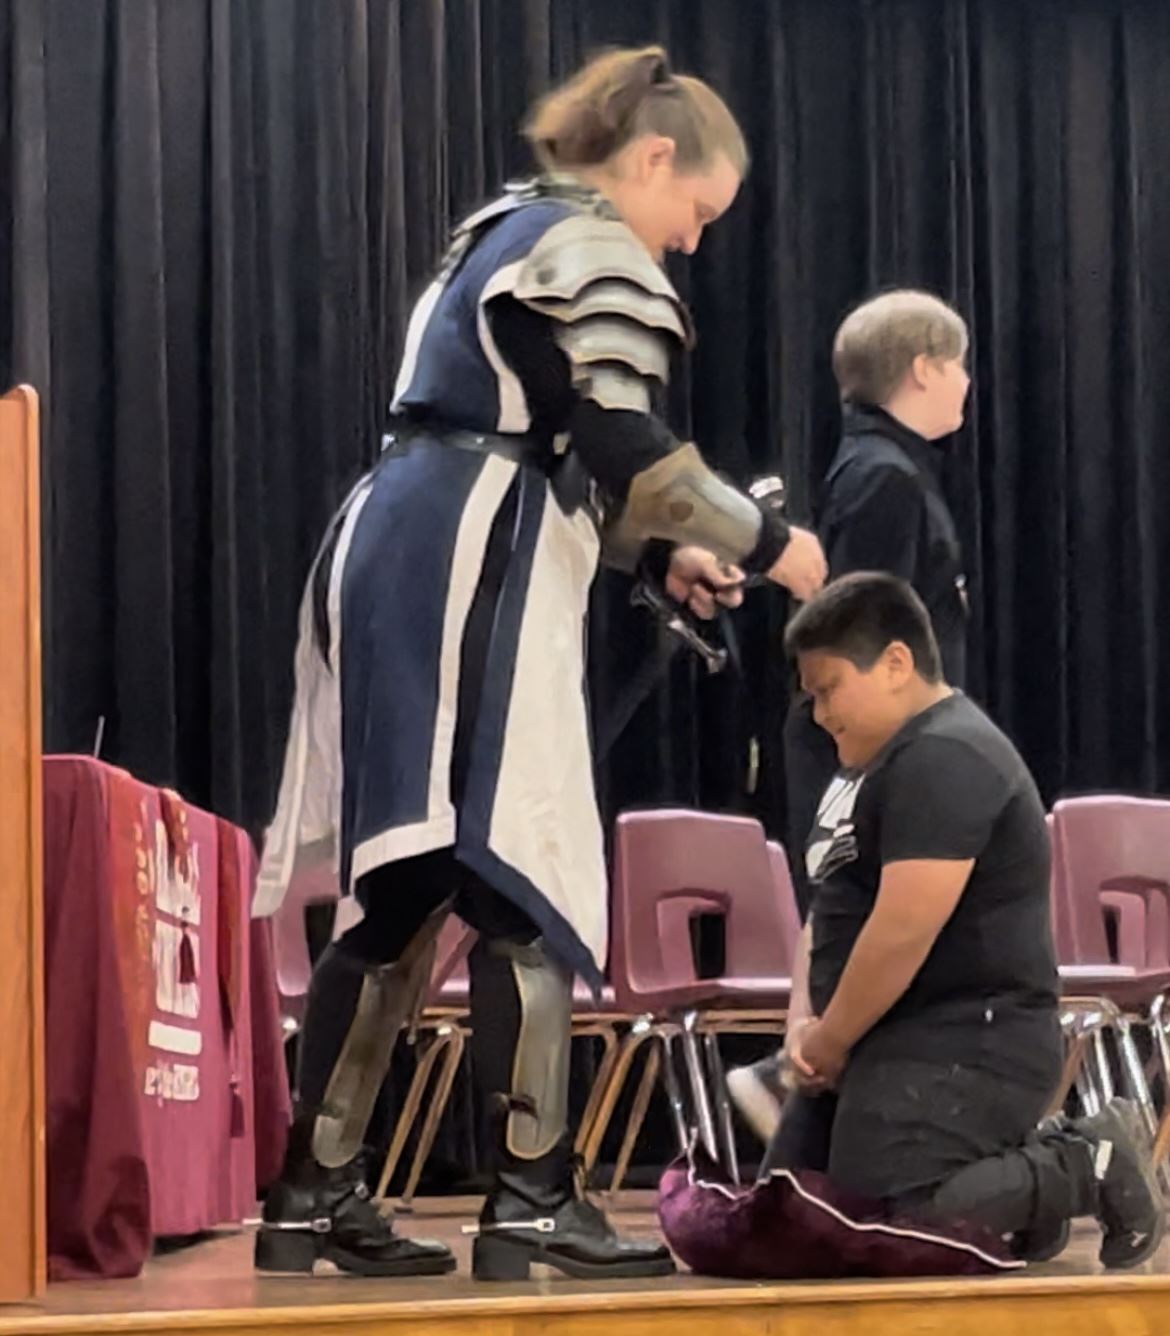  Student being knighted